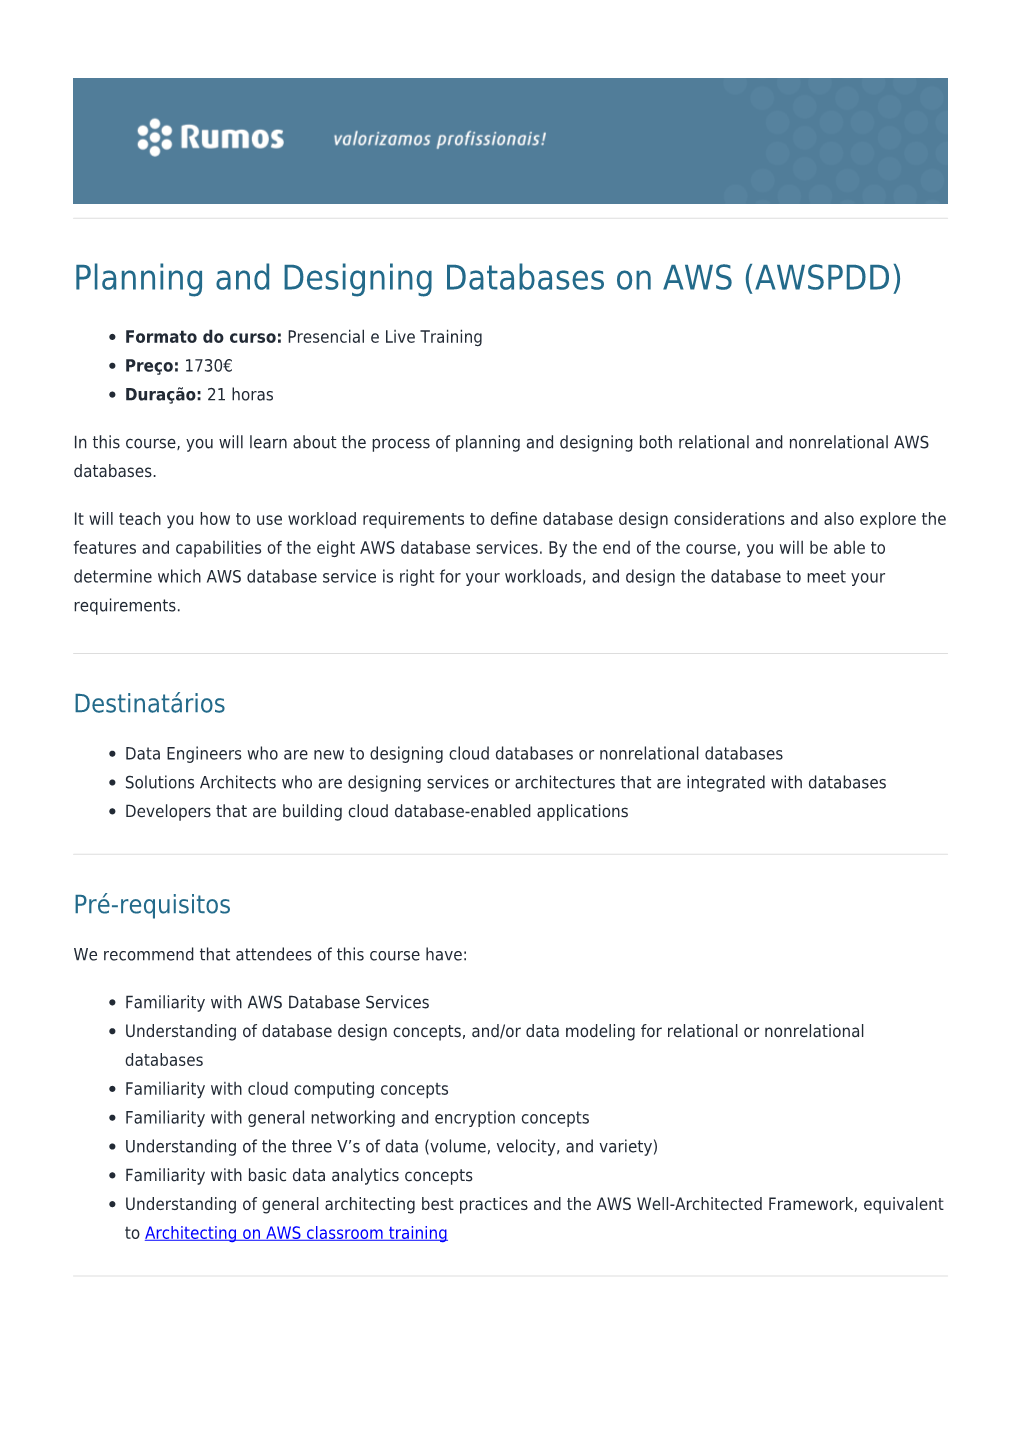 Planning and Designing Databases on AWS (AWSPDD)